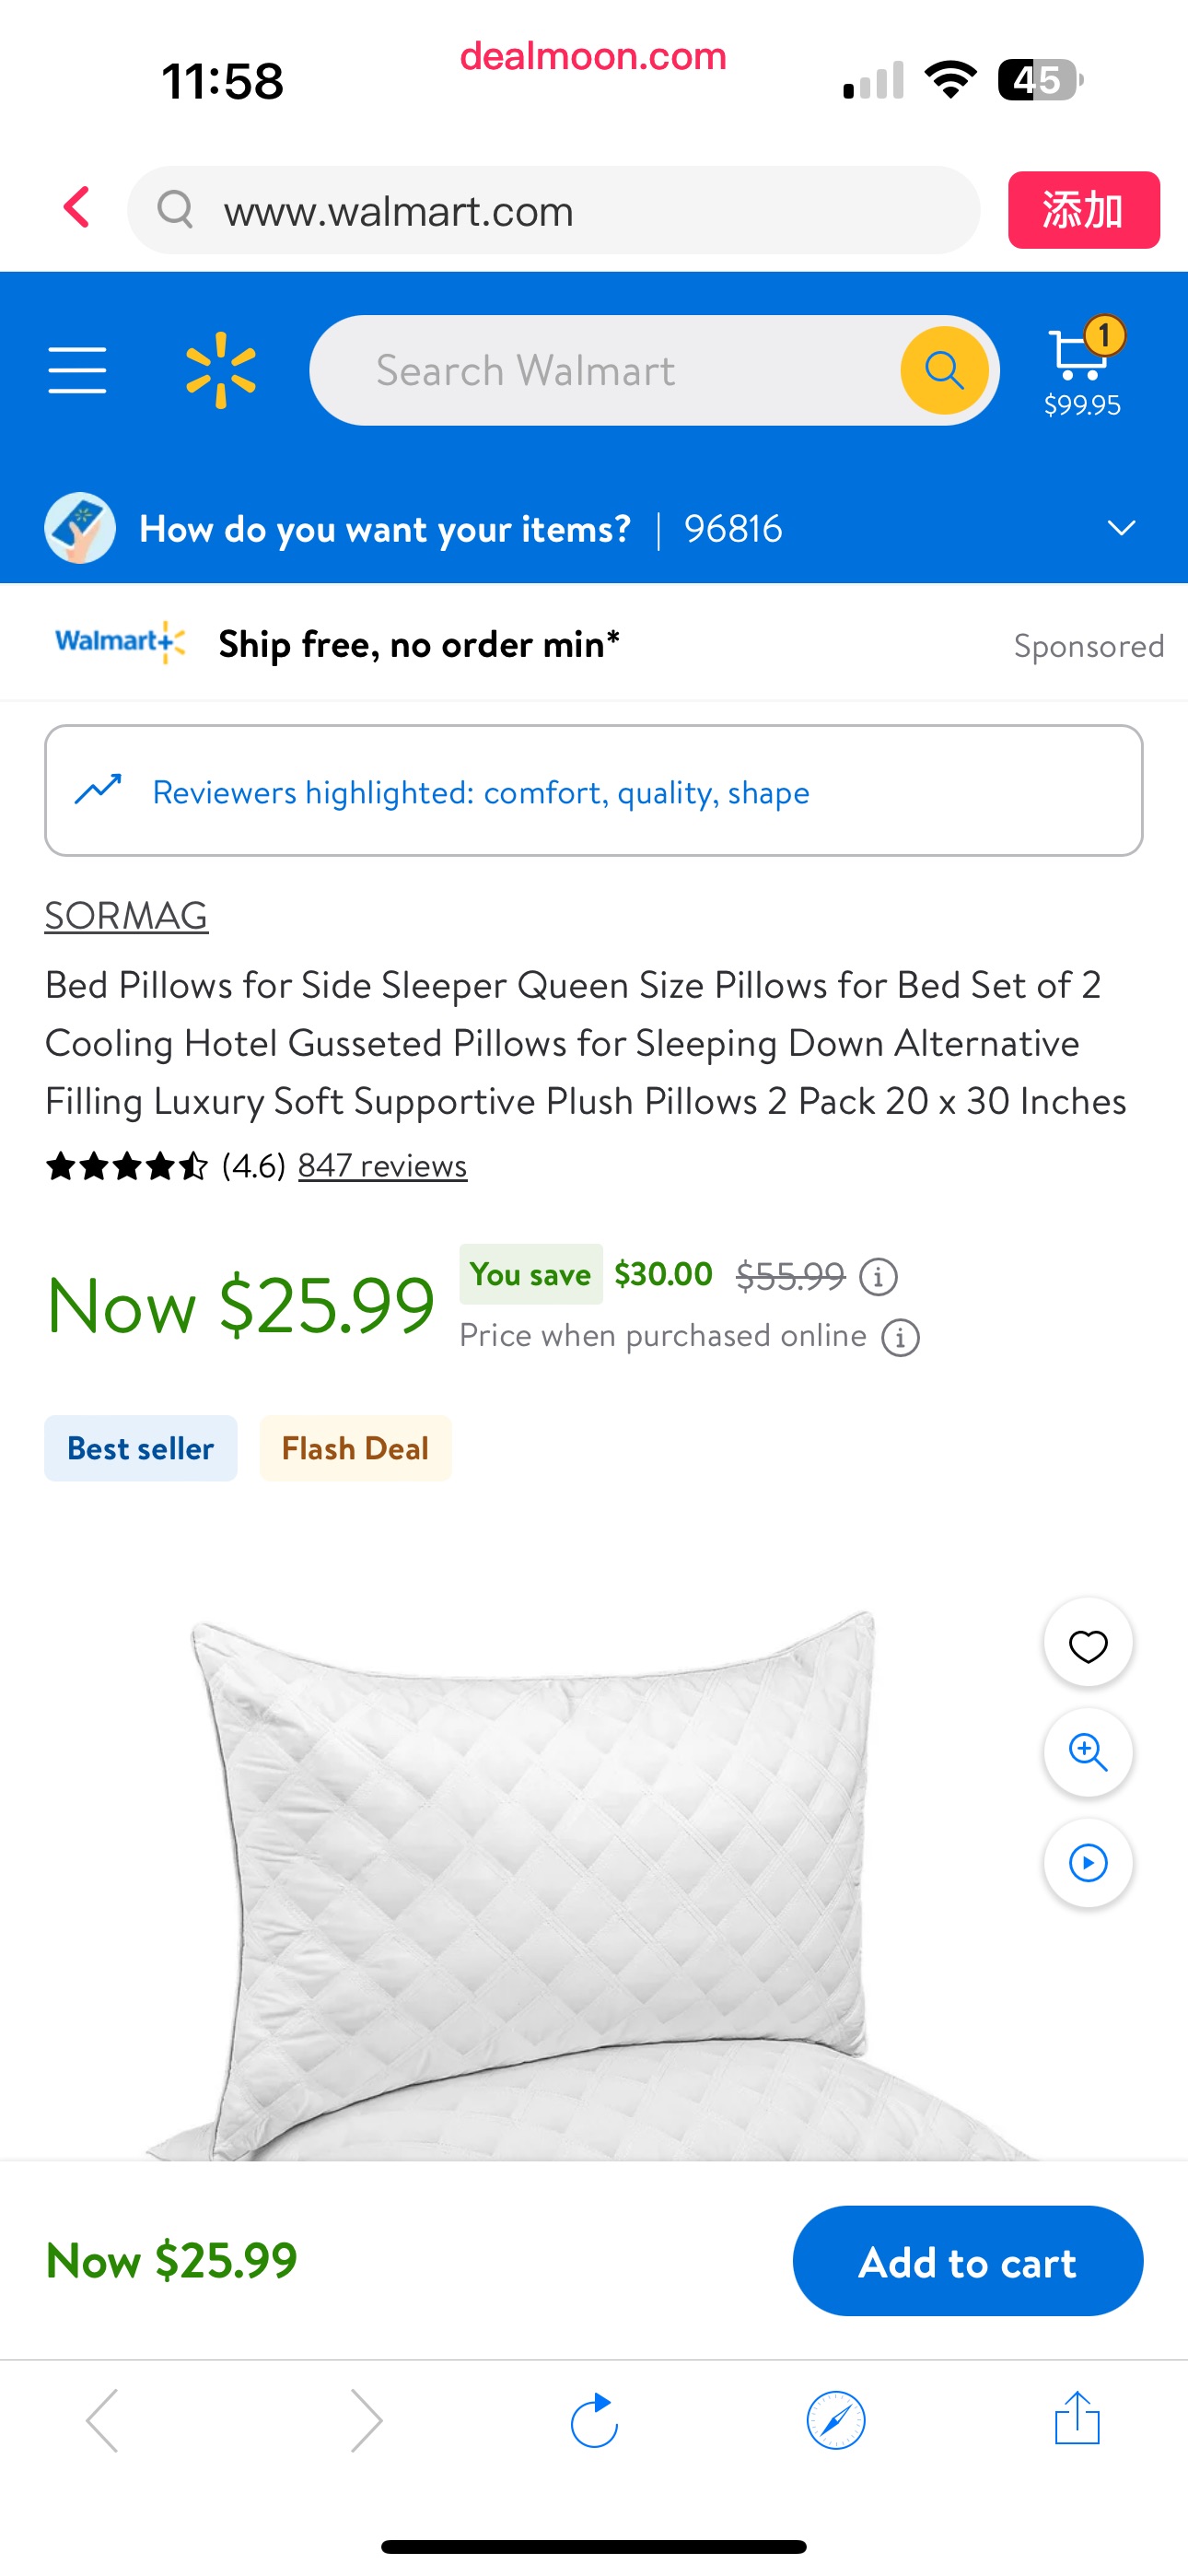 Bed Pillows for Side Sleeper Queen Size Pillows for Bed Set of 2 Cooling Hotel Gusseted Pillows for Sleeping Down Alternative Filling Luxury Soft Supportive Plush Pillows 2 Pack 20 x 30 Inches - Walma